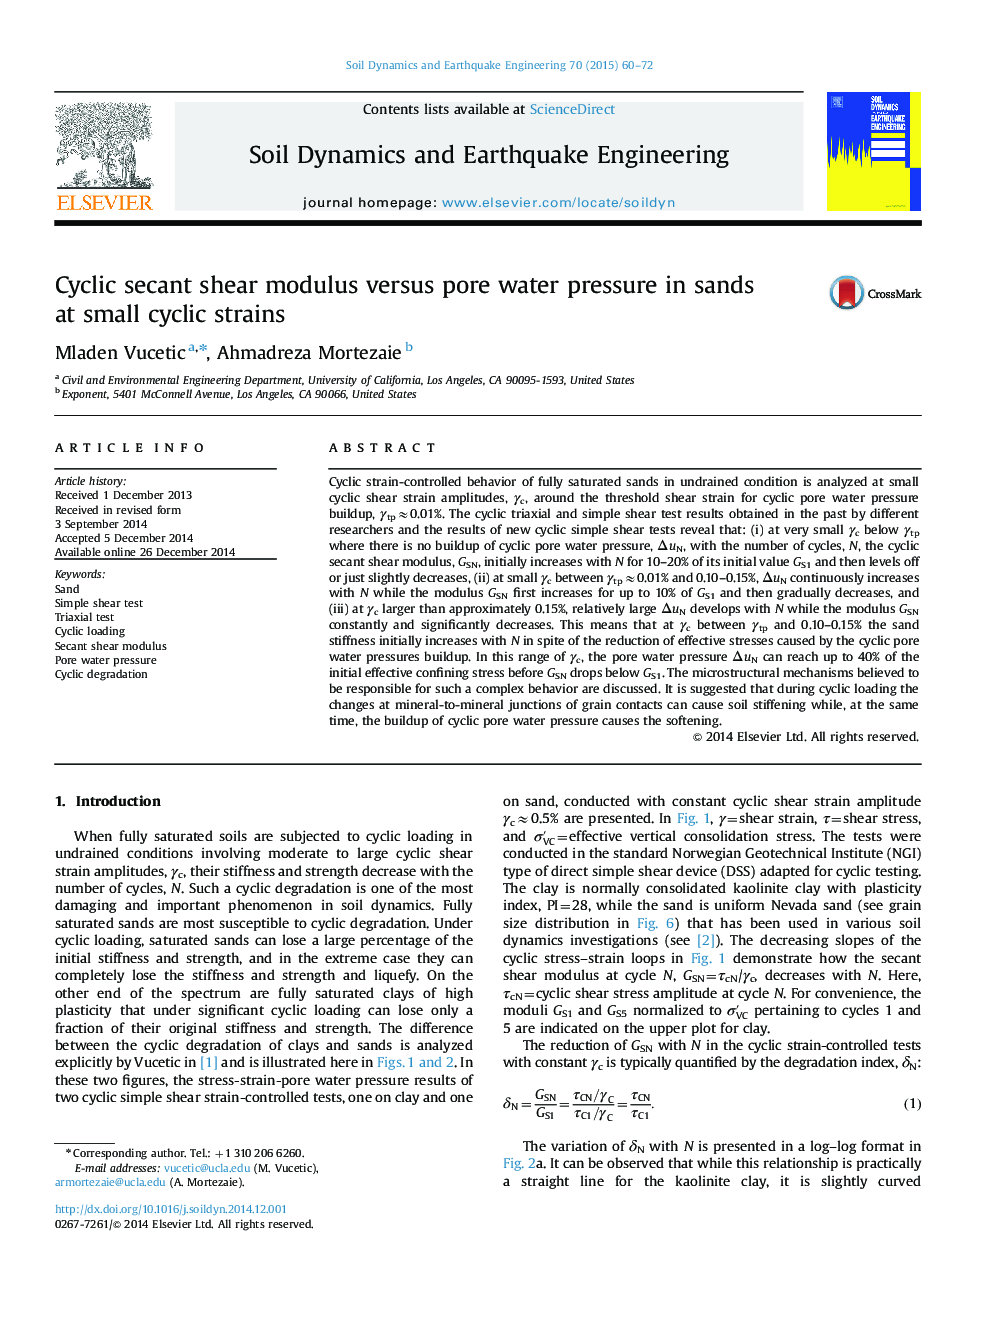 Cyclic secant shear modulus versus pore water pressure in sands at small cyclic strains